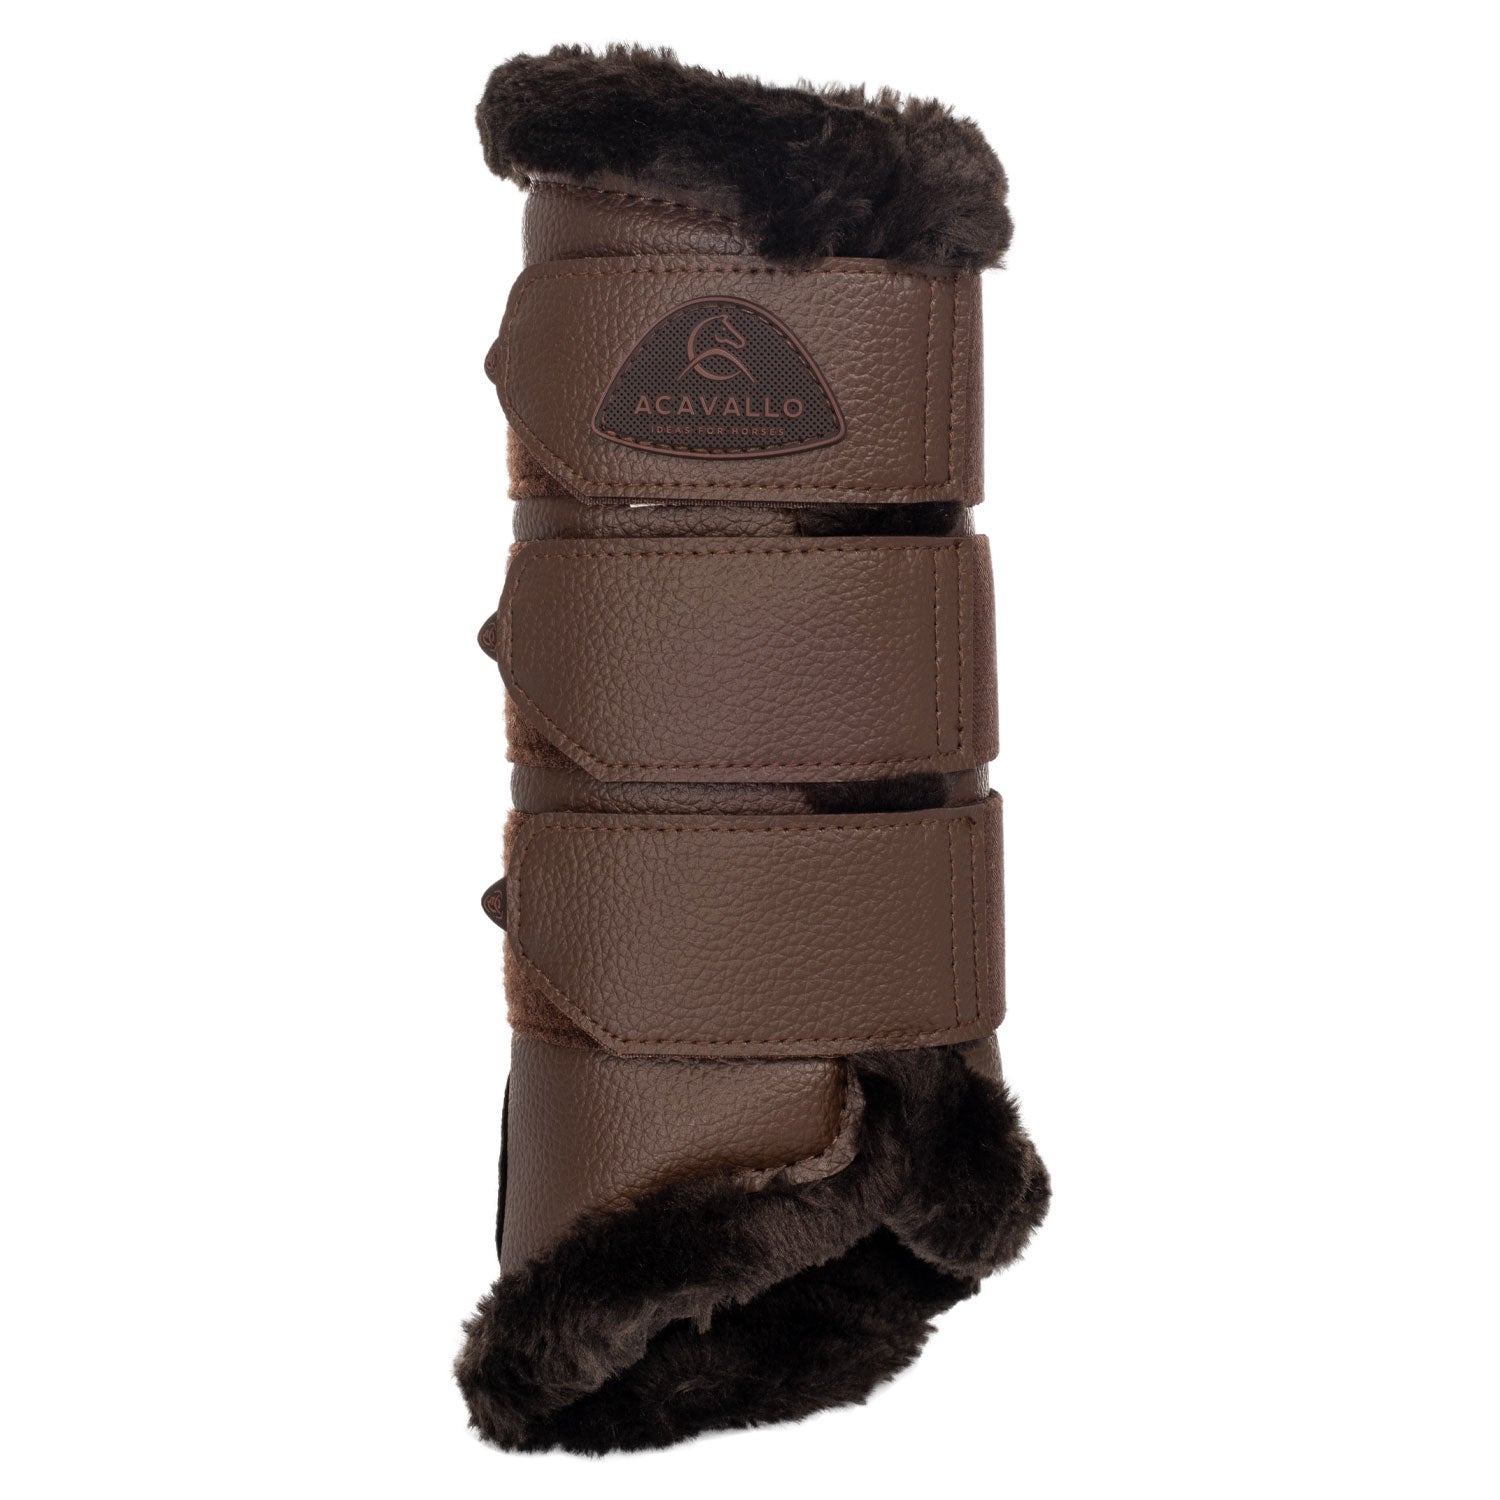 Leather brushing boots for horses